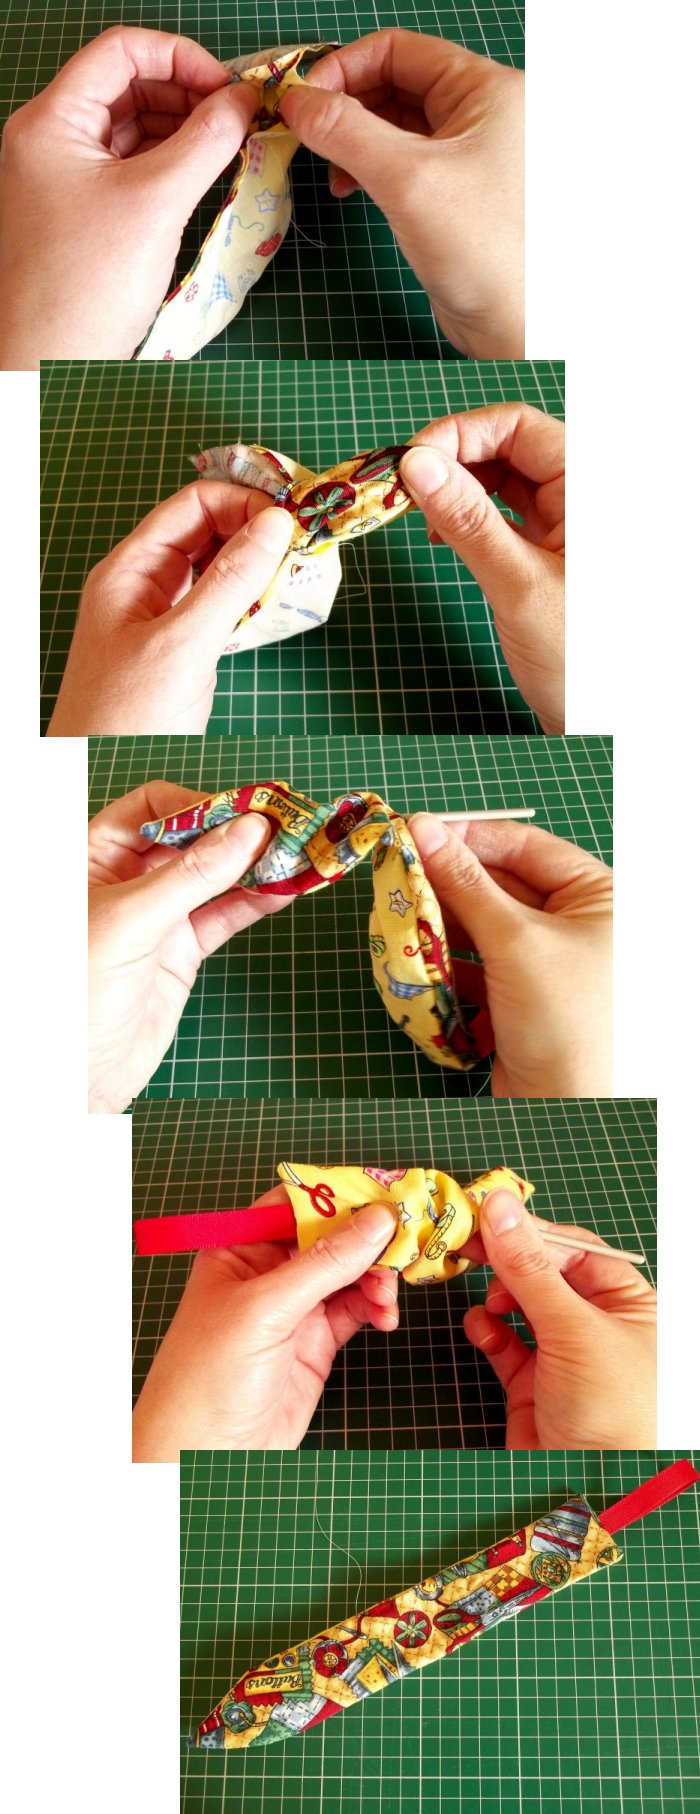 Things to make and do - Fabric Bookmarks